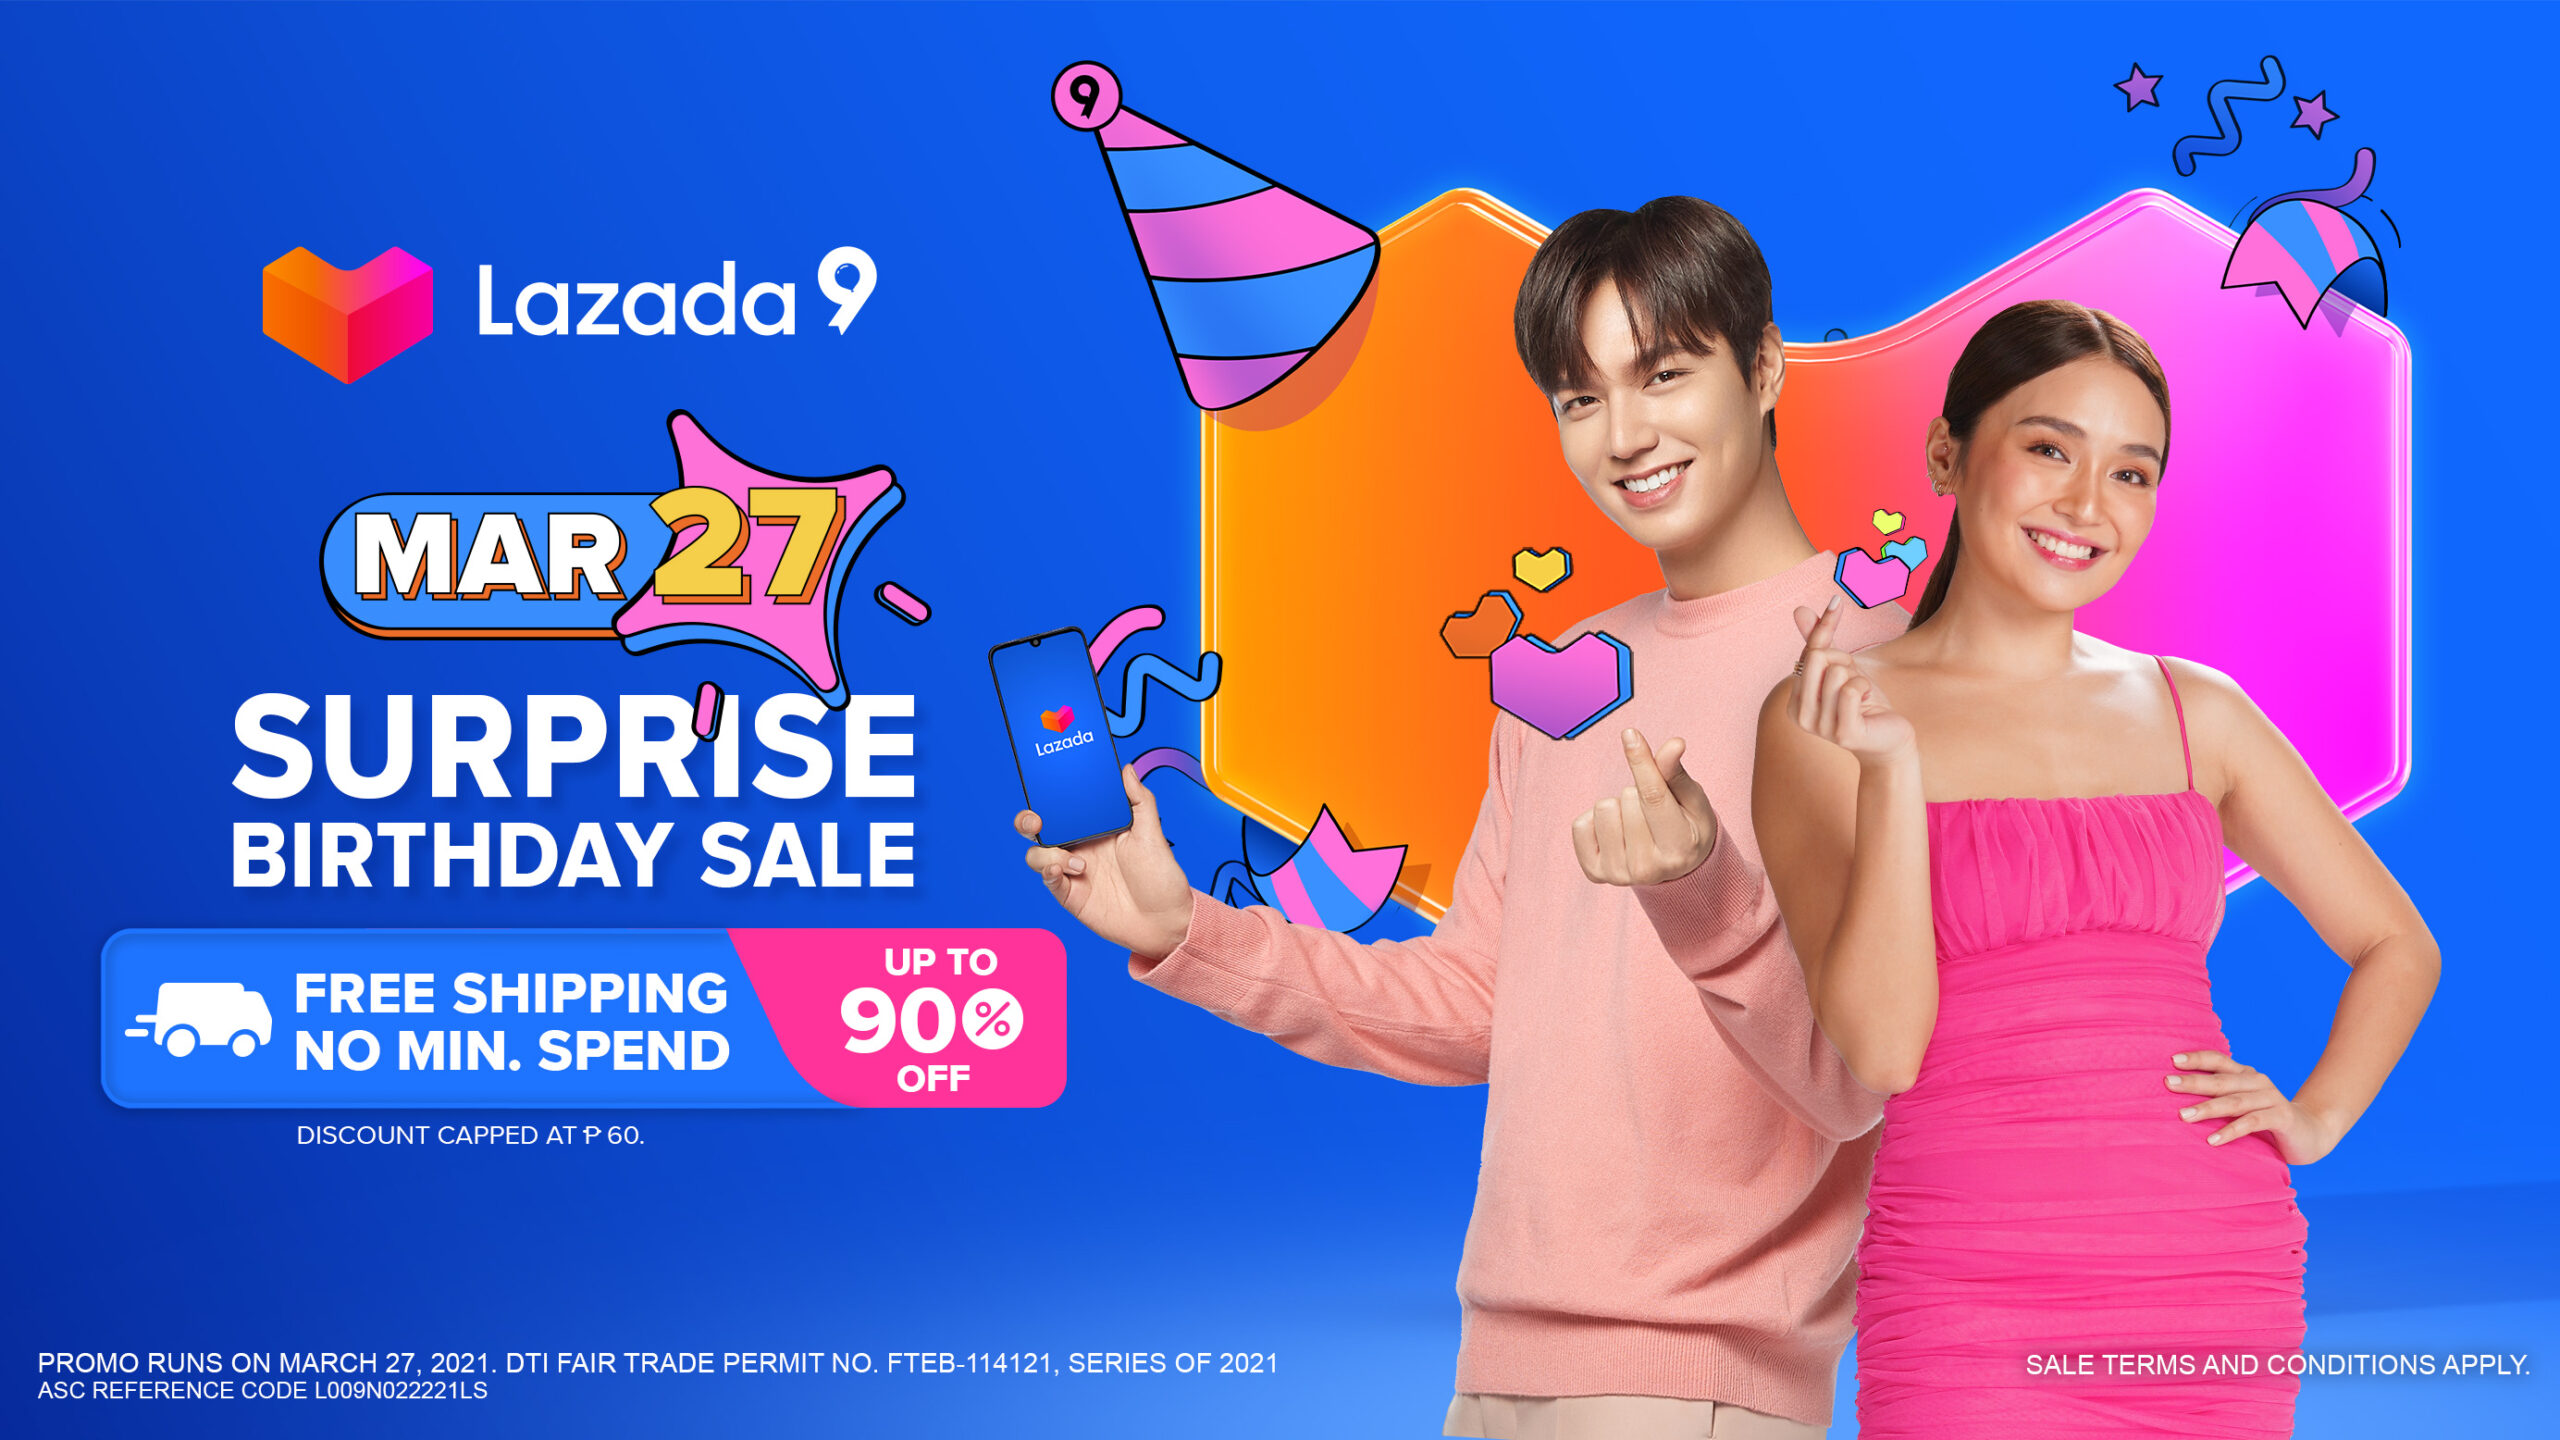 Here’s what to expect on Lazada’s 9th anniversary